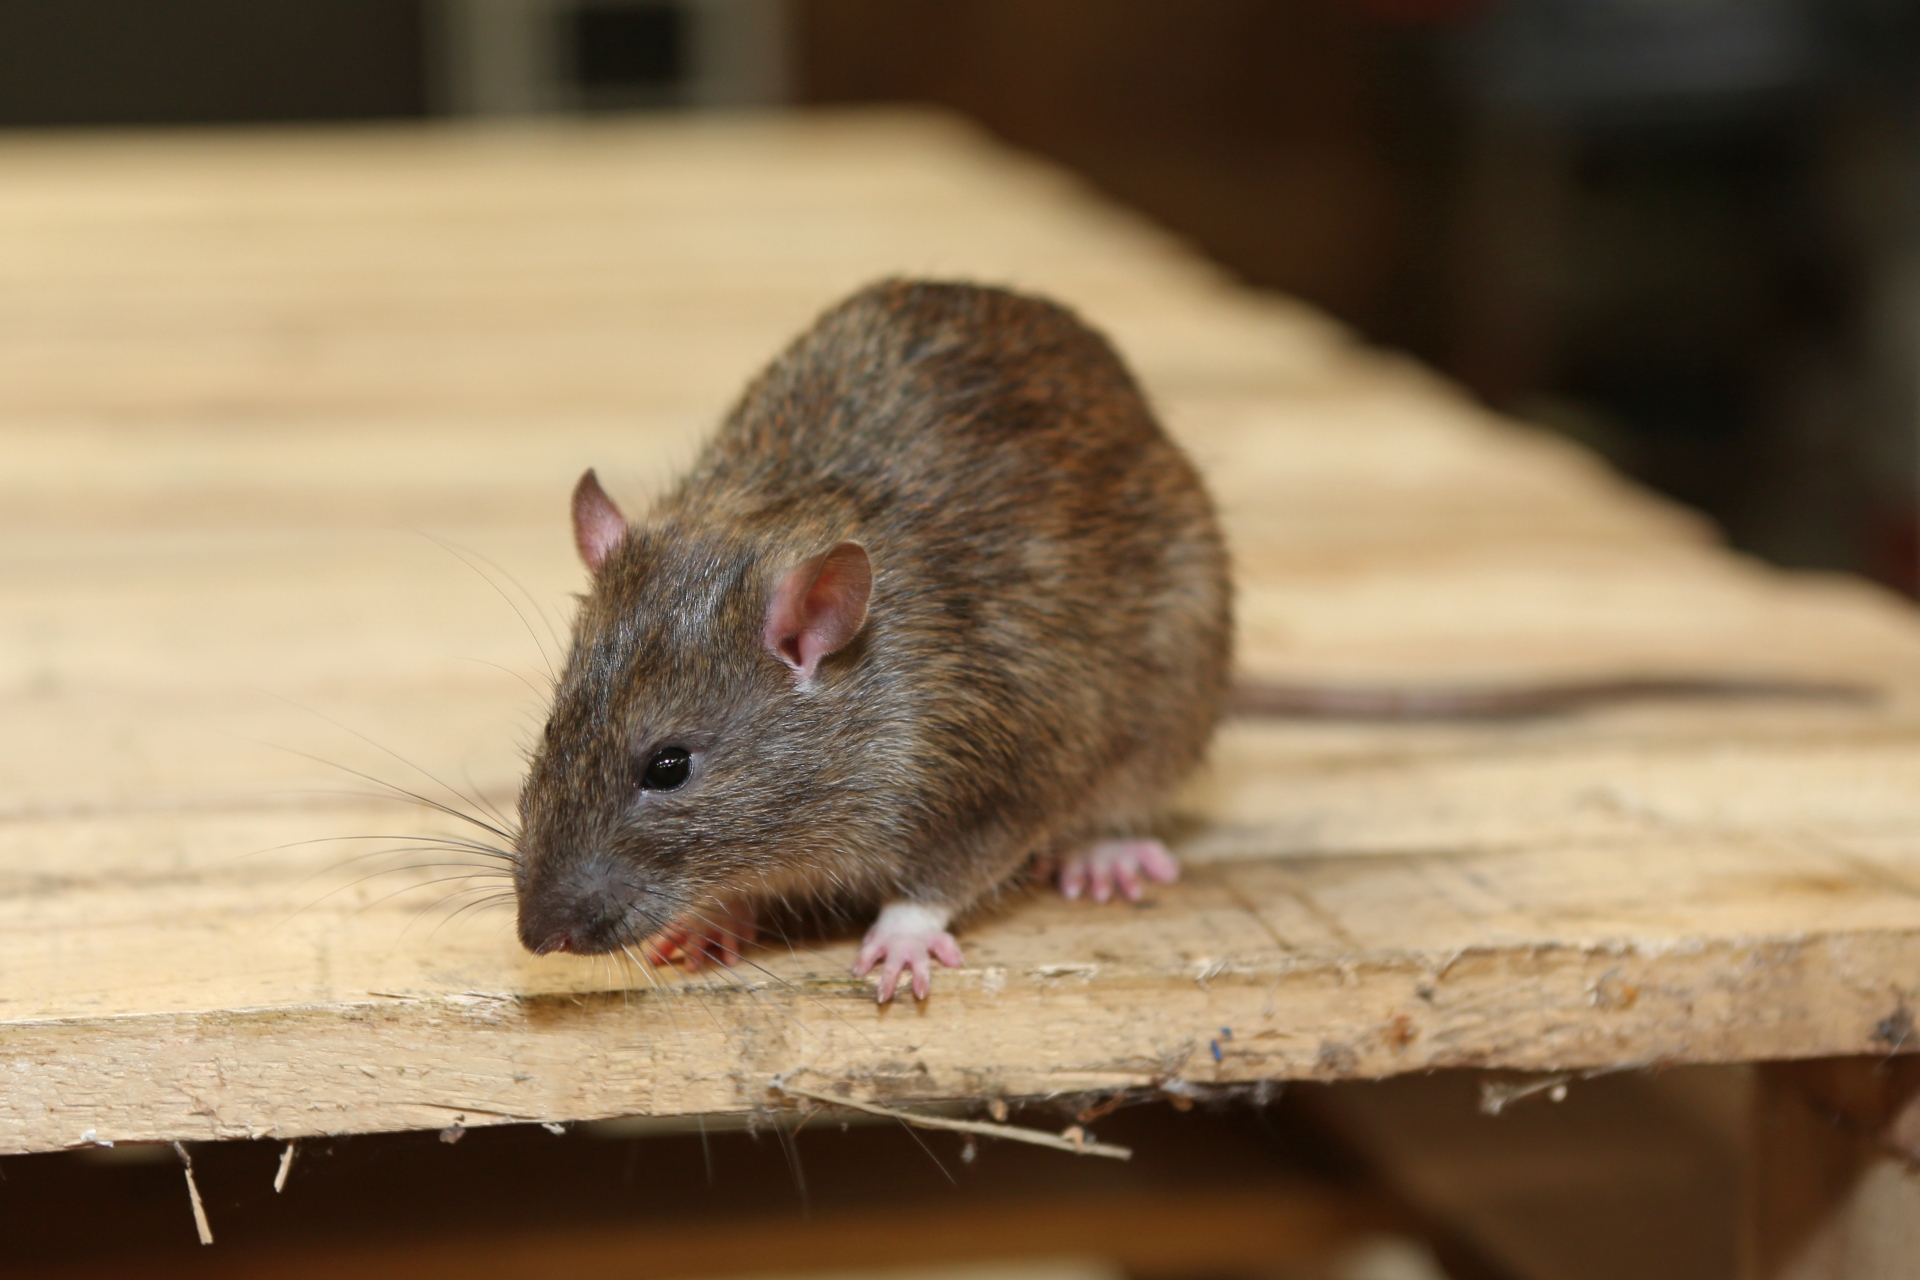 Rat Control, Pest Control in Archway, N19. Call Now 020 8166 9746